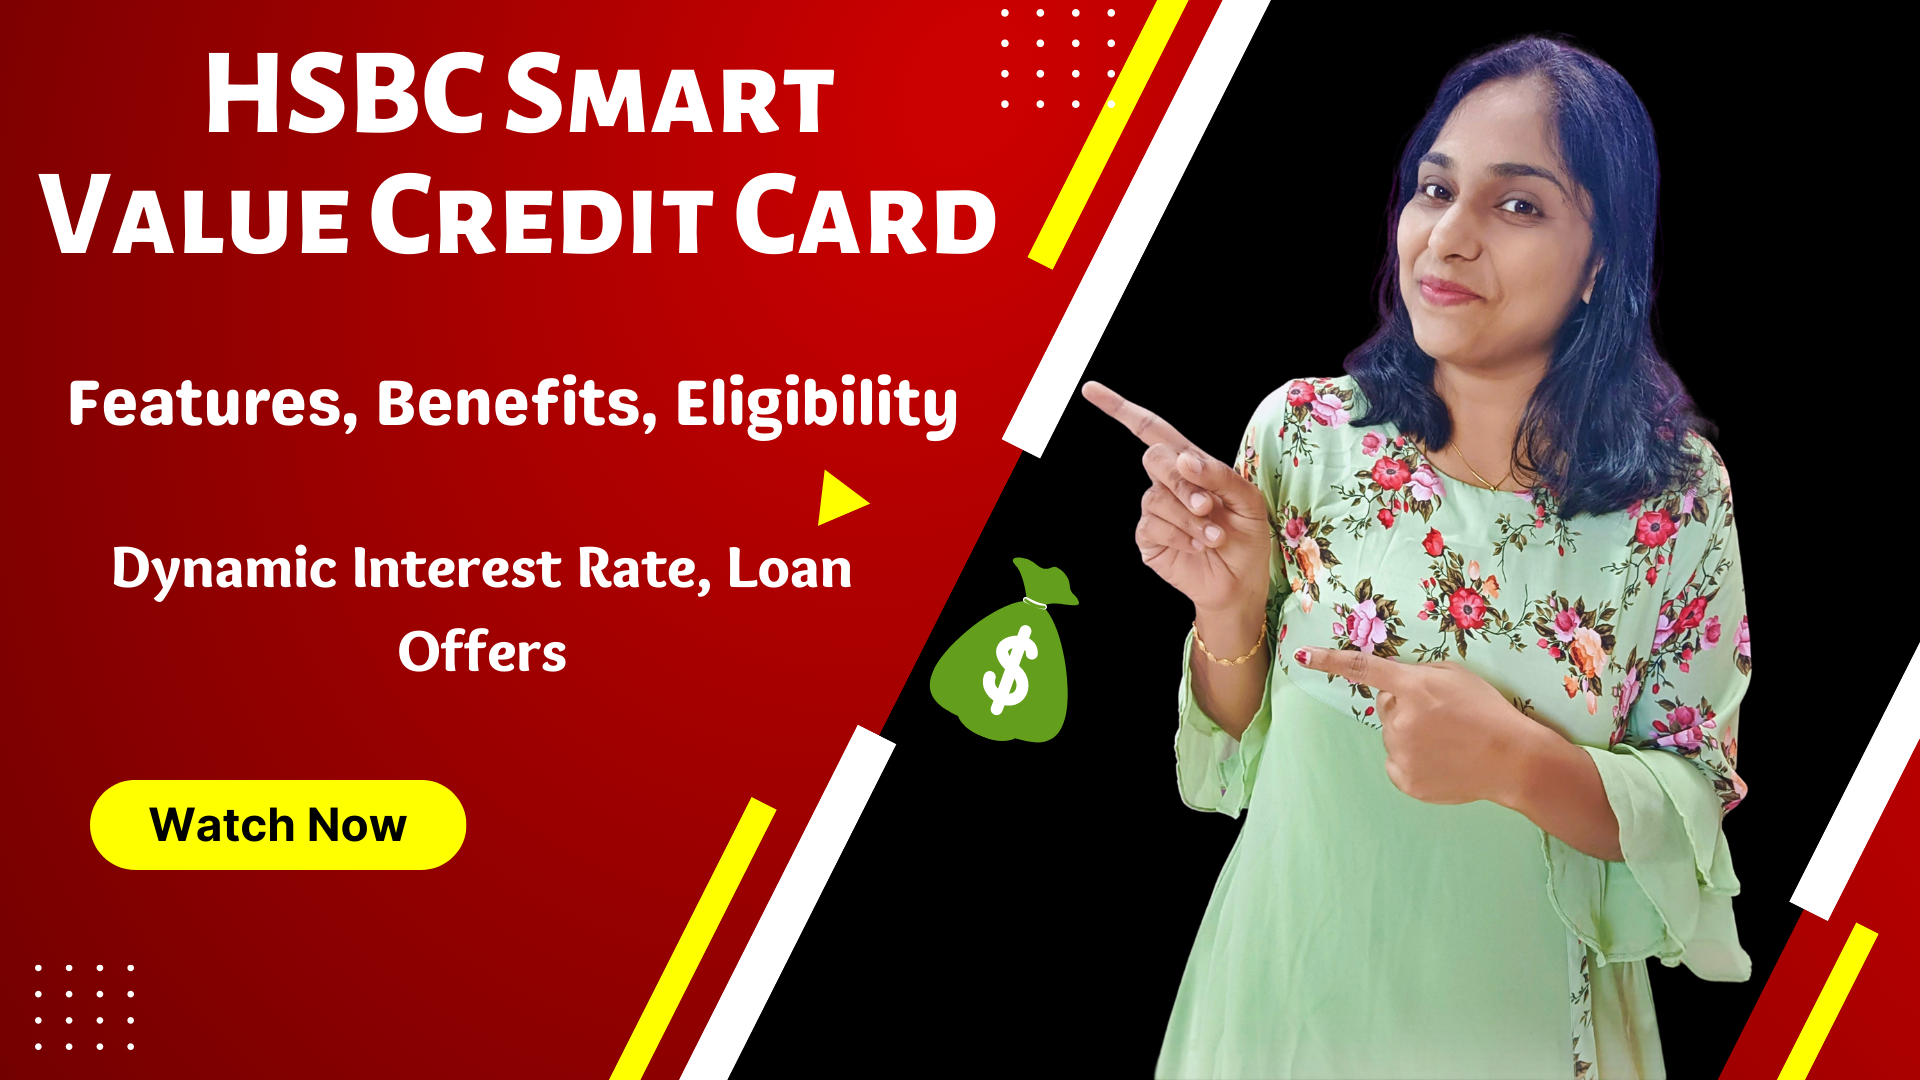 HSBC Smart Value Credit Card: Features, Benefits, Eligibility | Dynamic Interest Rate, Loan Offers